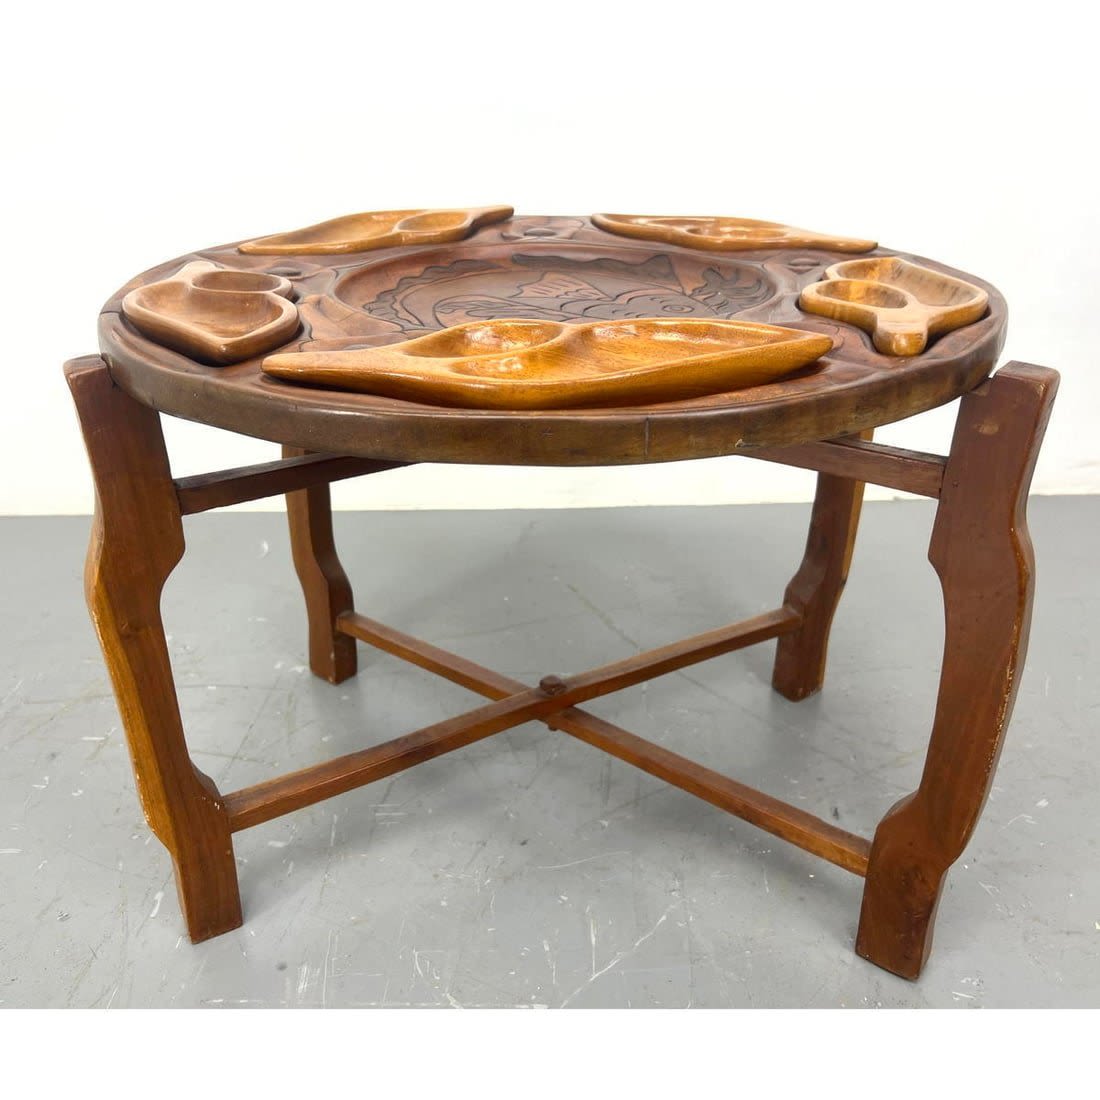 Carved Wood Round Coffee Table.